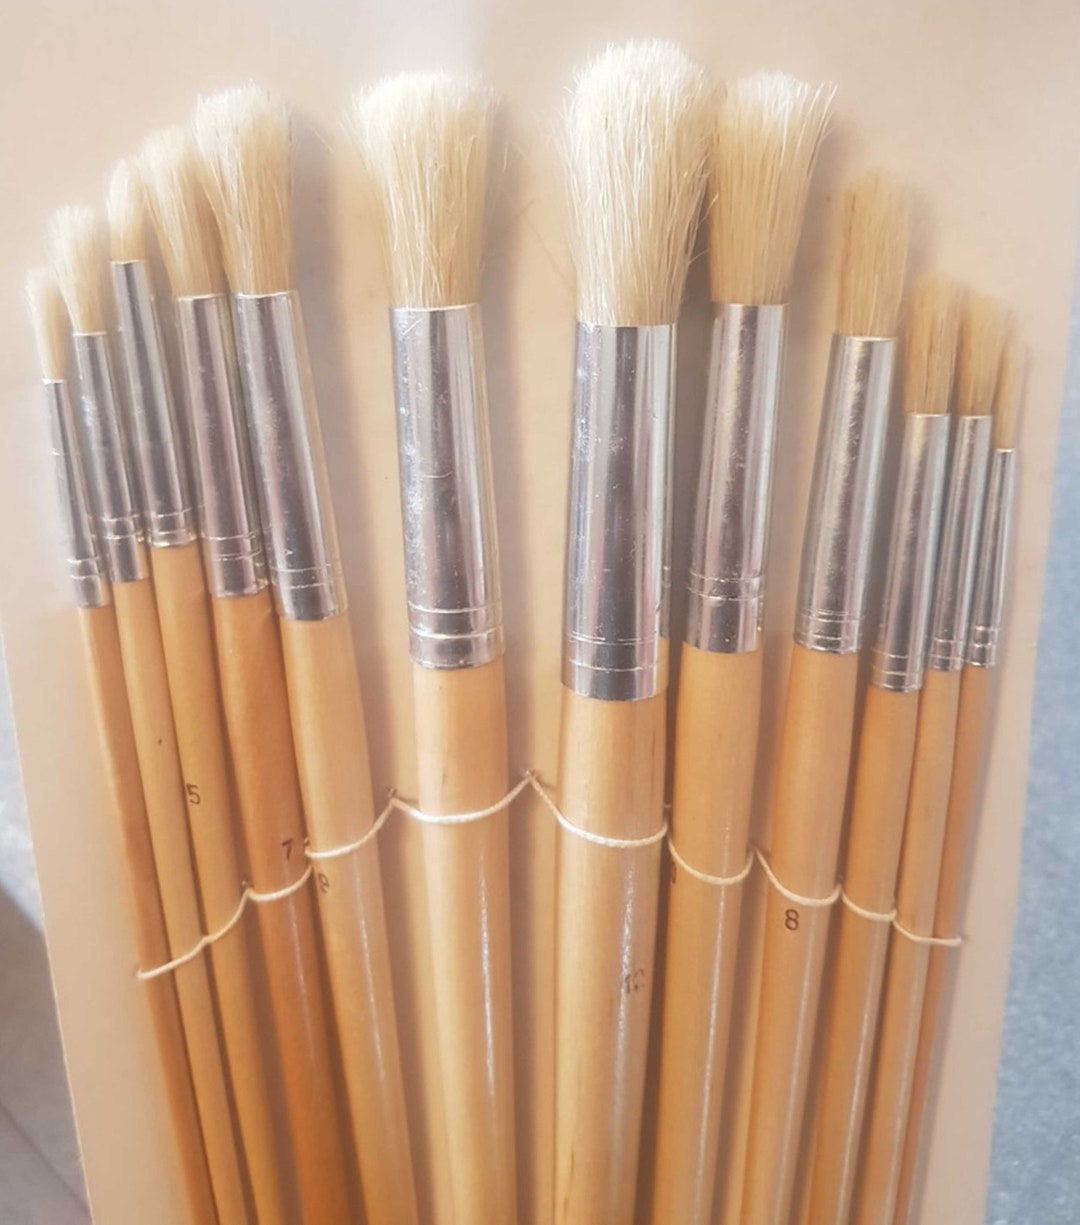 12PC LONG HANDLE WOODEN ROUND HEAD ARTIST PAINT BRUSH SETS Art Craft Brushes  NEW 5057502808165